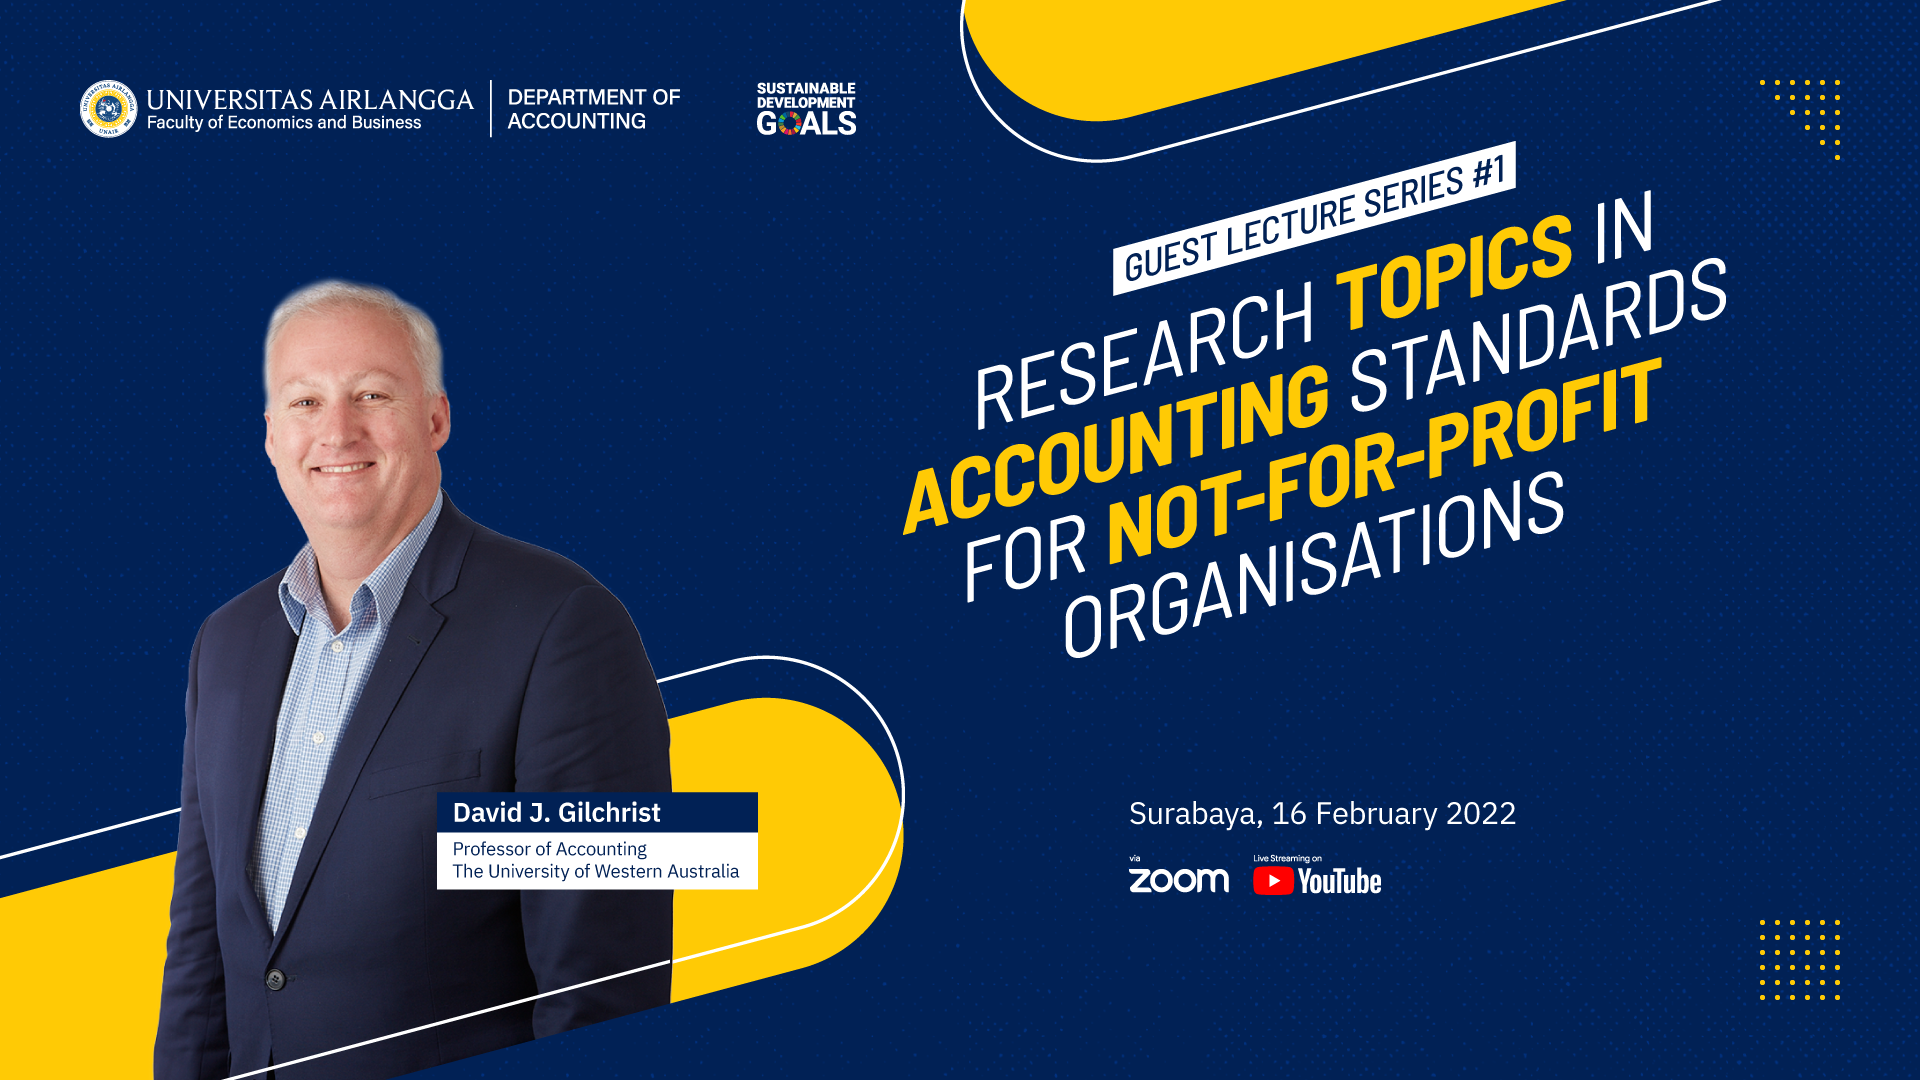 Guest Lecture #1: Research Topics in Accounting Standards for Not-for-profit Organizations